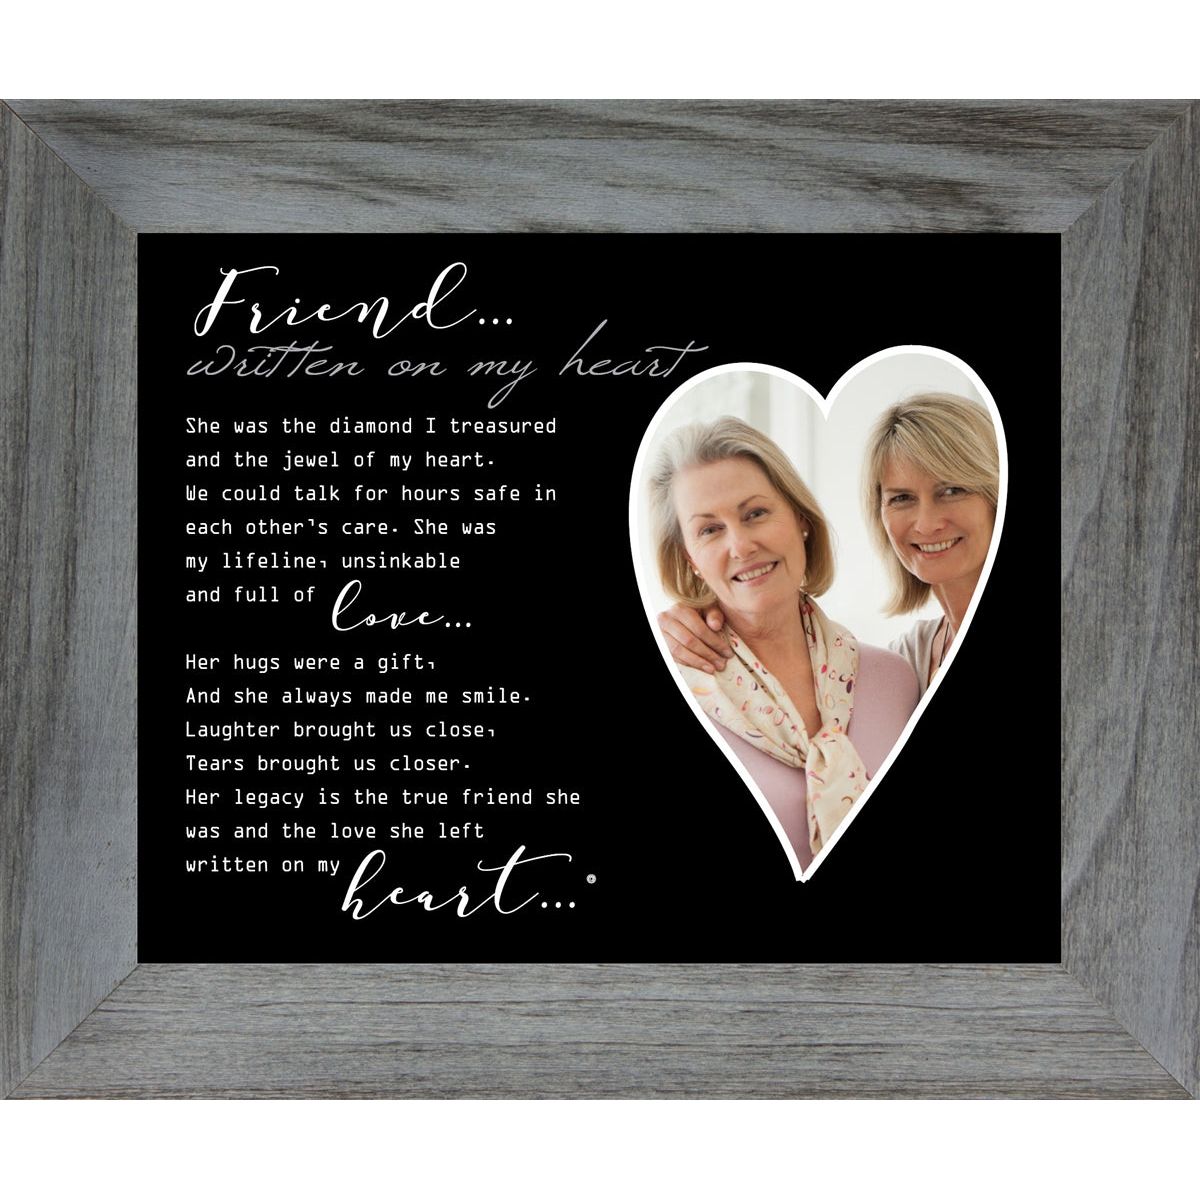 8x10 Distressed Gray wood frame with &quot;Friend... Written on My Heart&quot; poem and an heart shaped opening for a photograph.